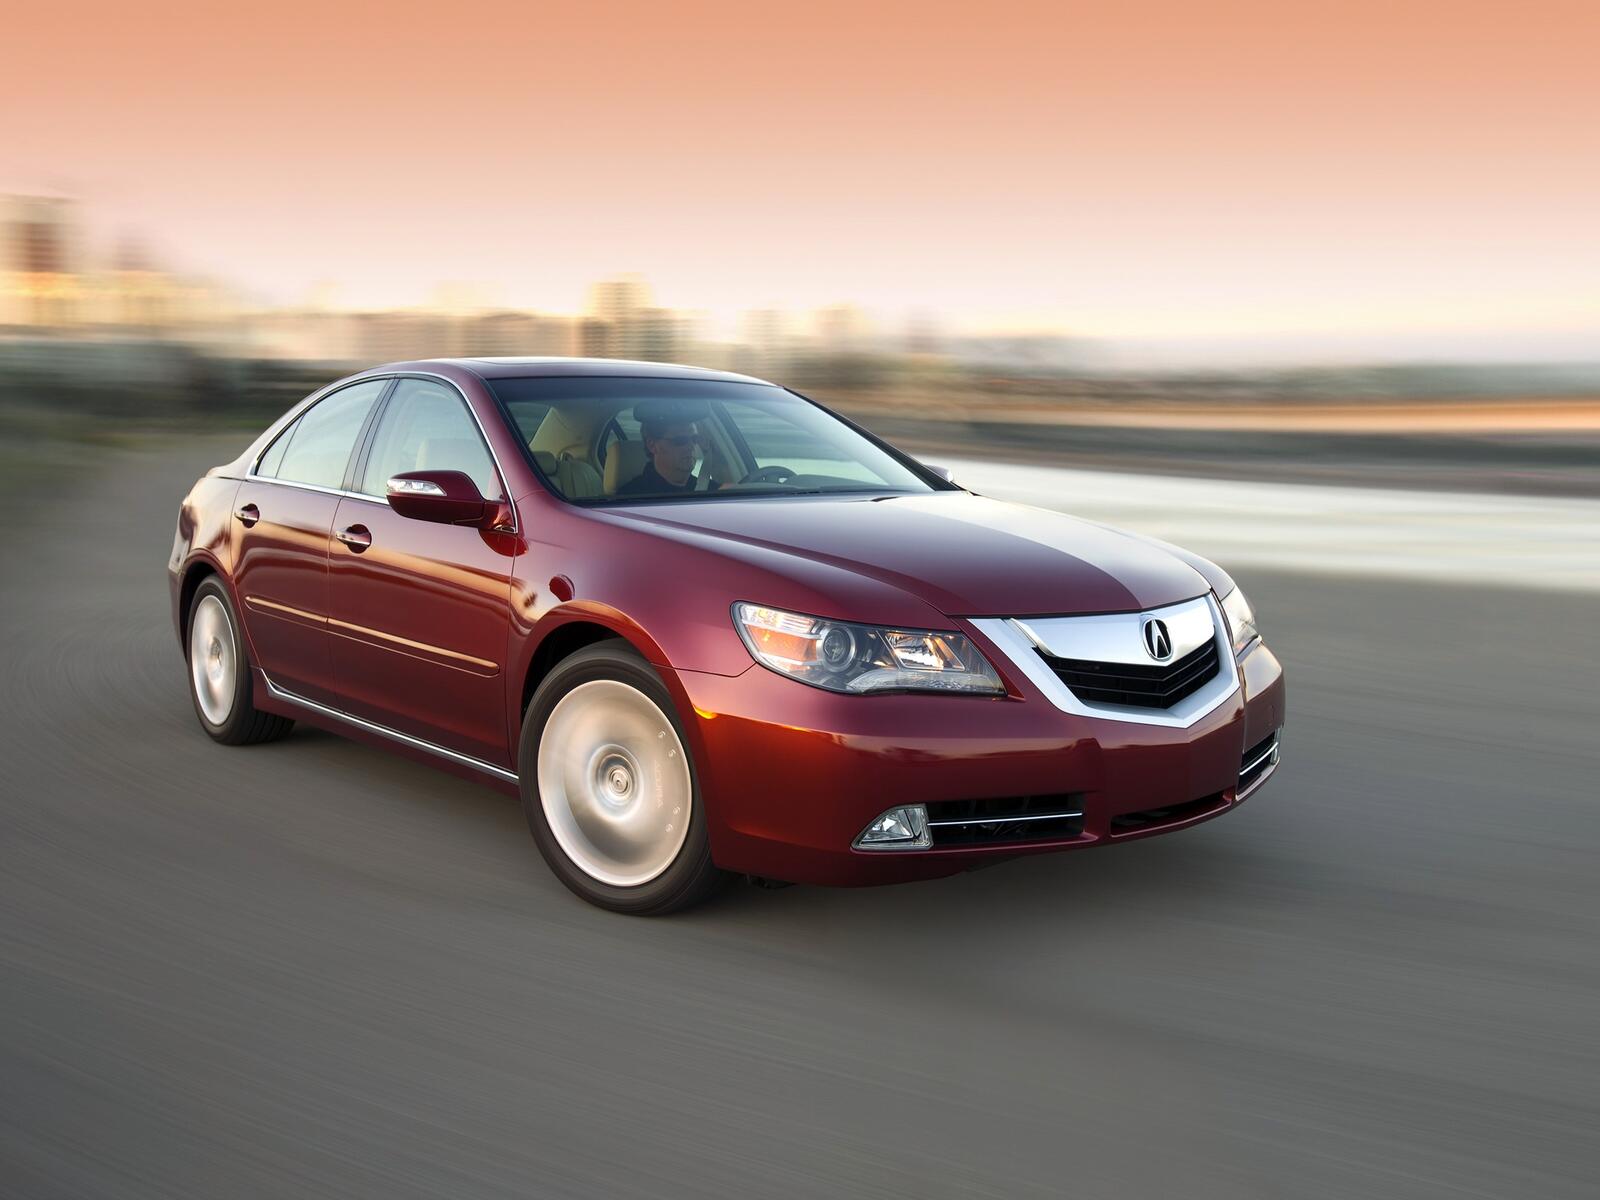 Wallpapers Acura rl red on the desktop